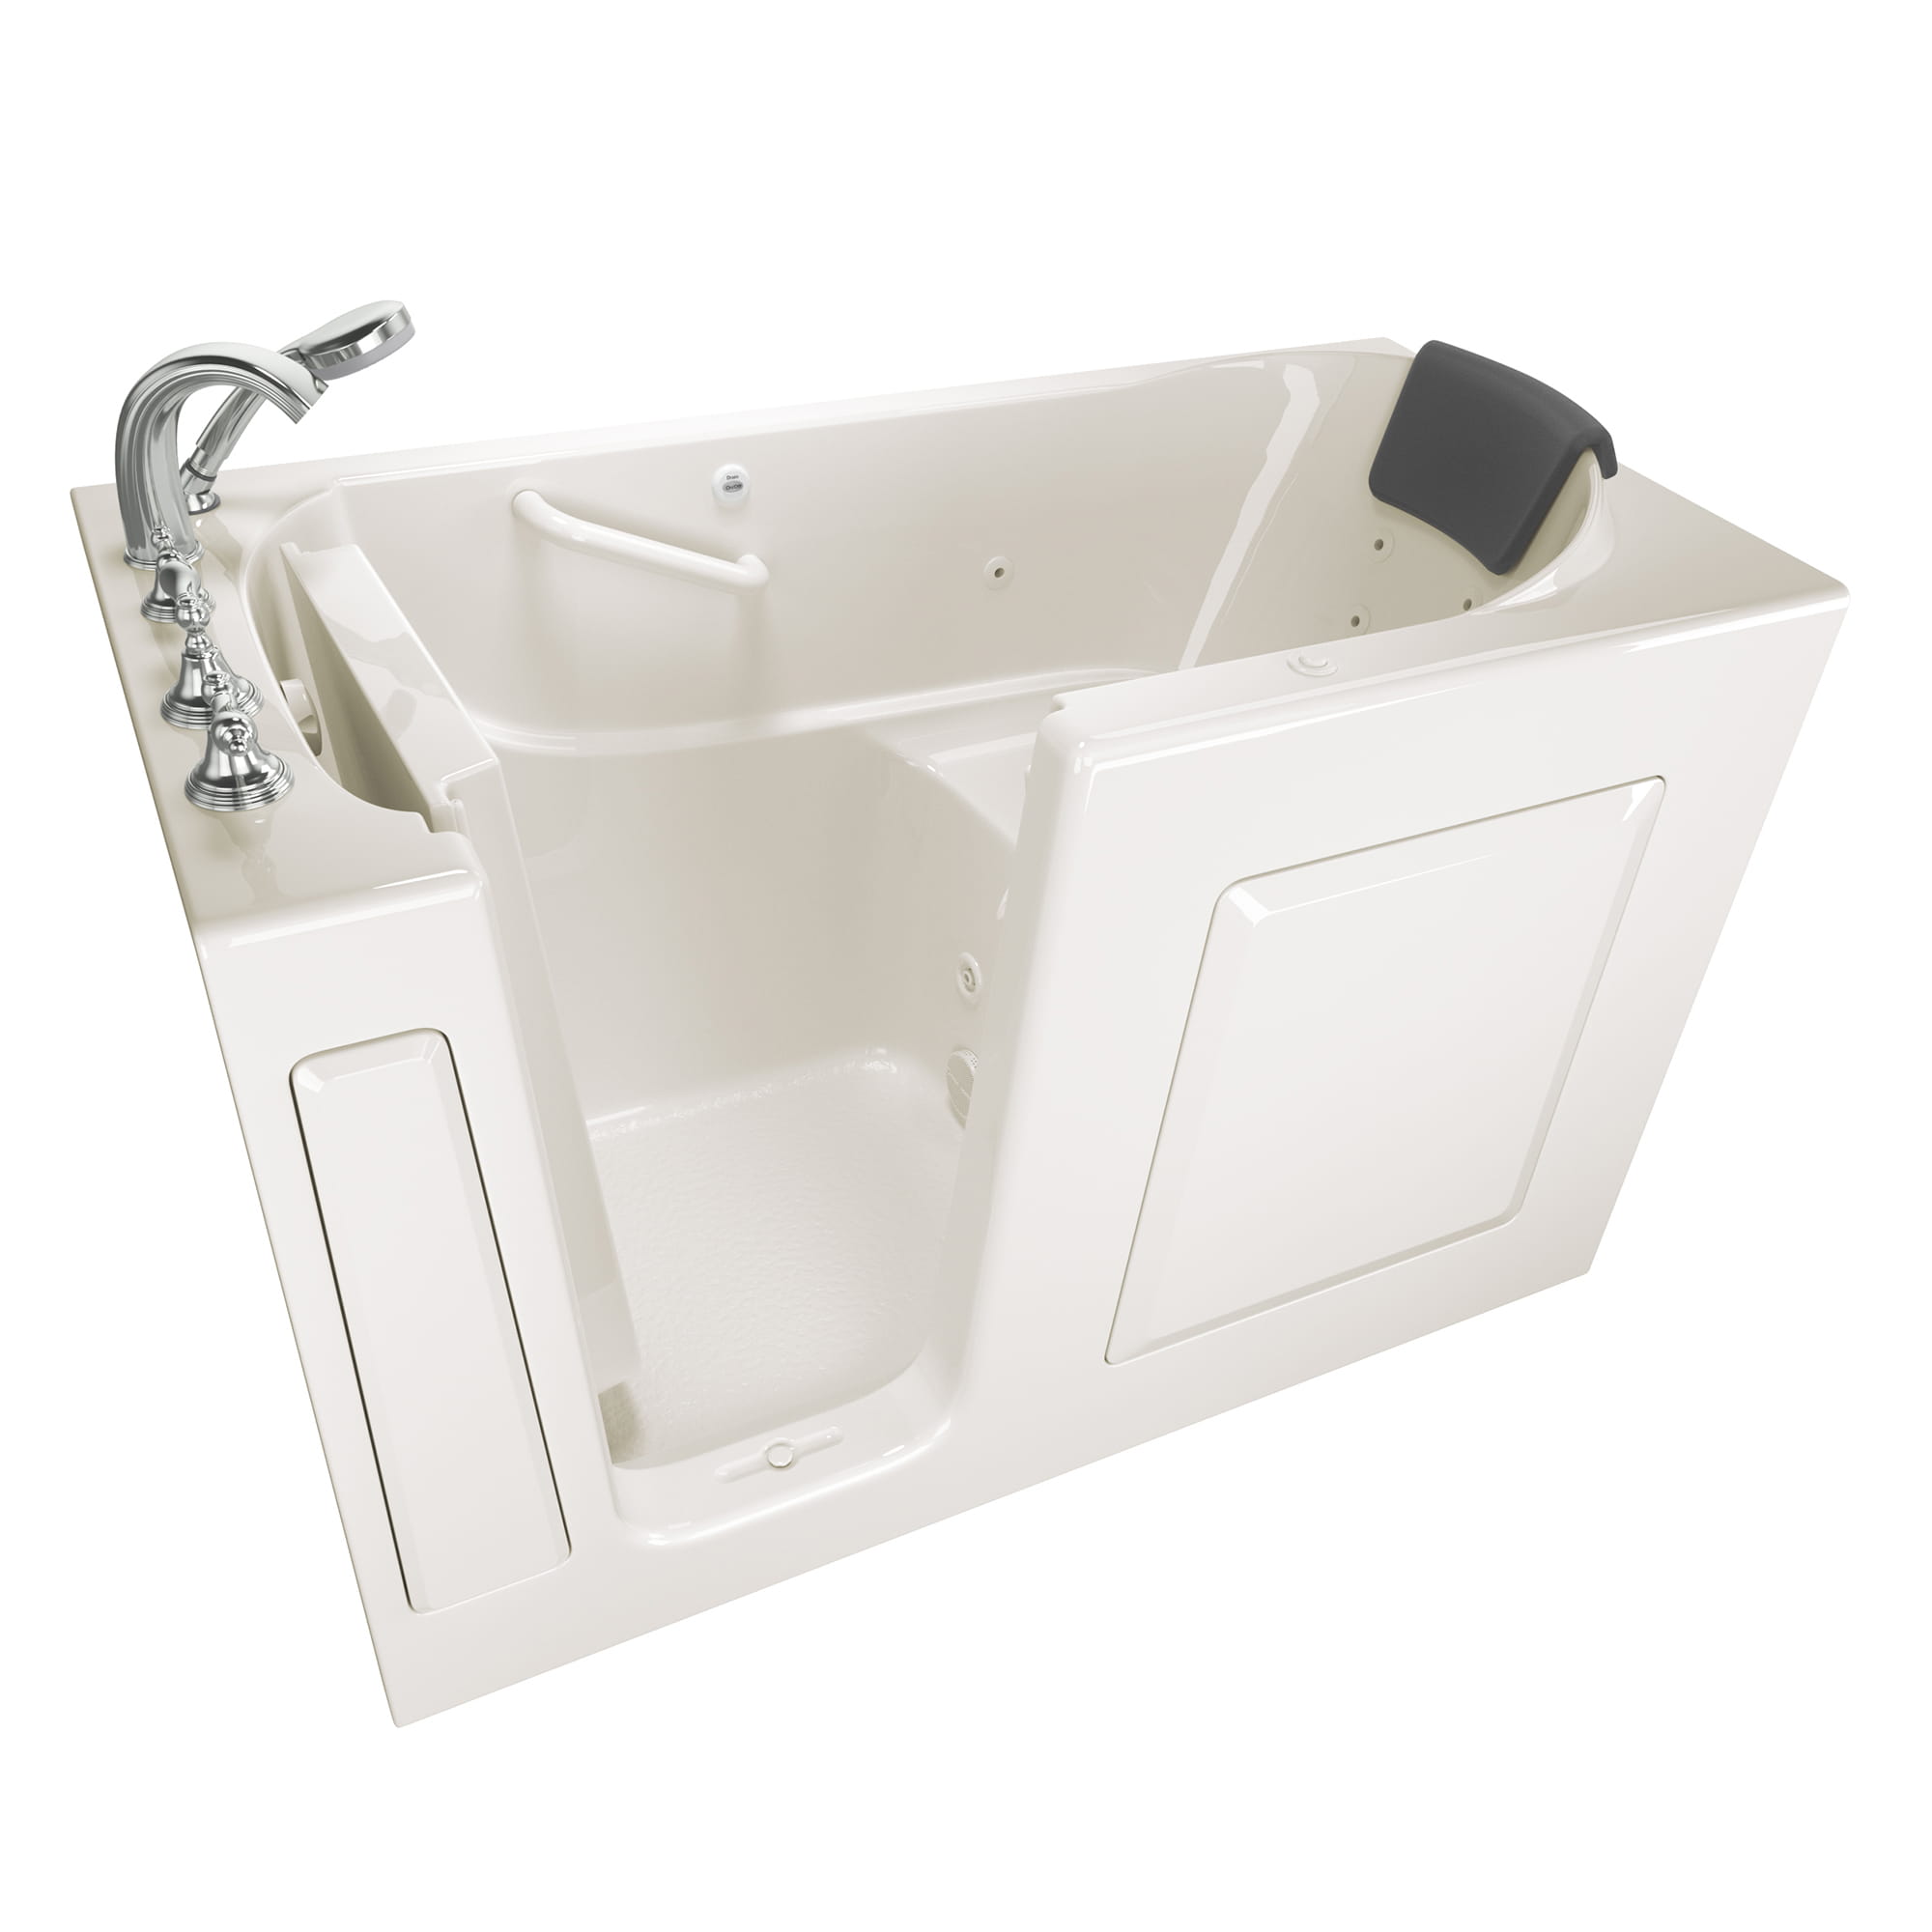 Gelcoat Premium Series 30 x 60 -Inch Walk-in Tub With Whirlpool System - Left-Hand Drain With Faucet